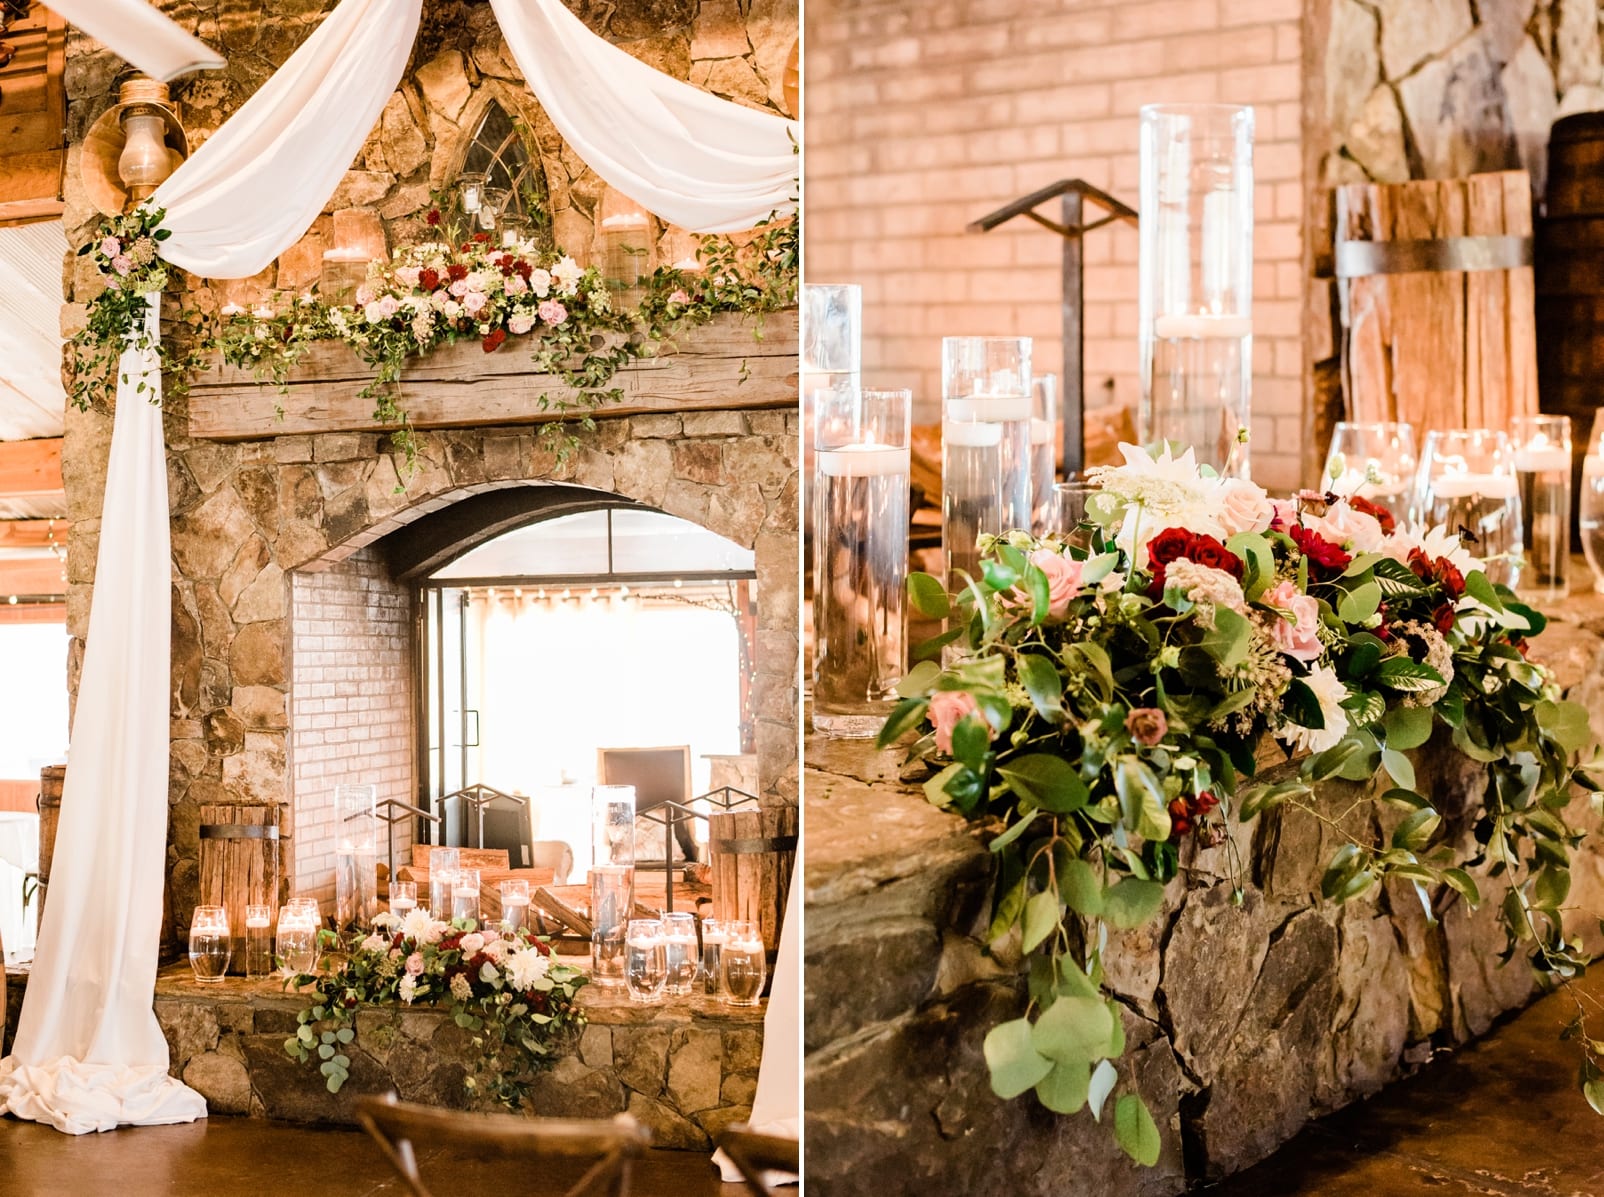 Angus barn wedding reception in front of large stone fireplace draped with fabric at the top photo